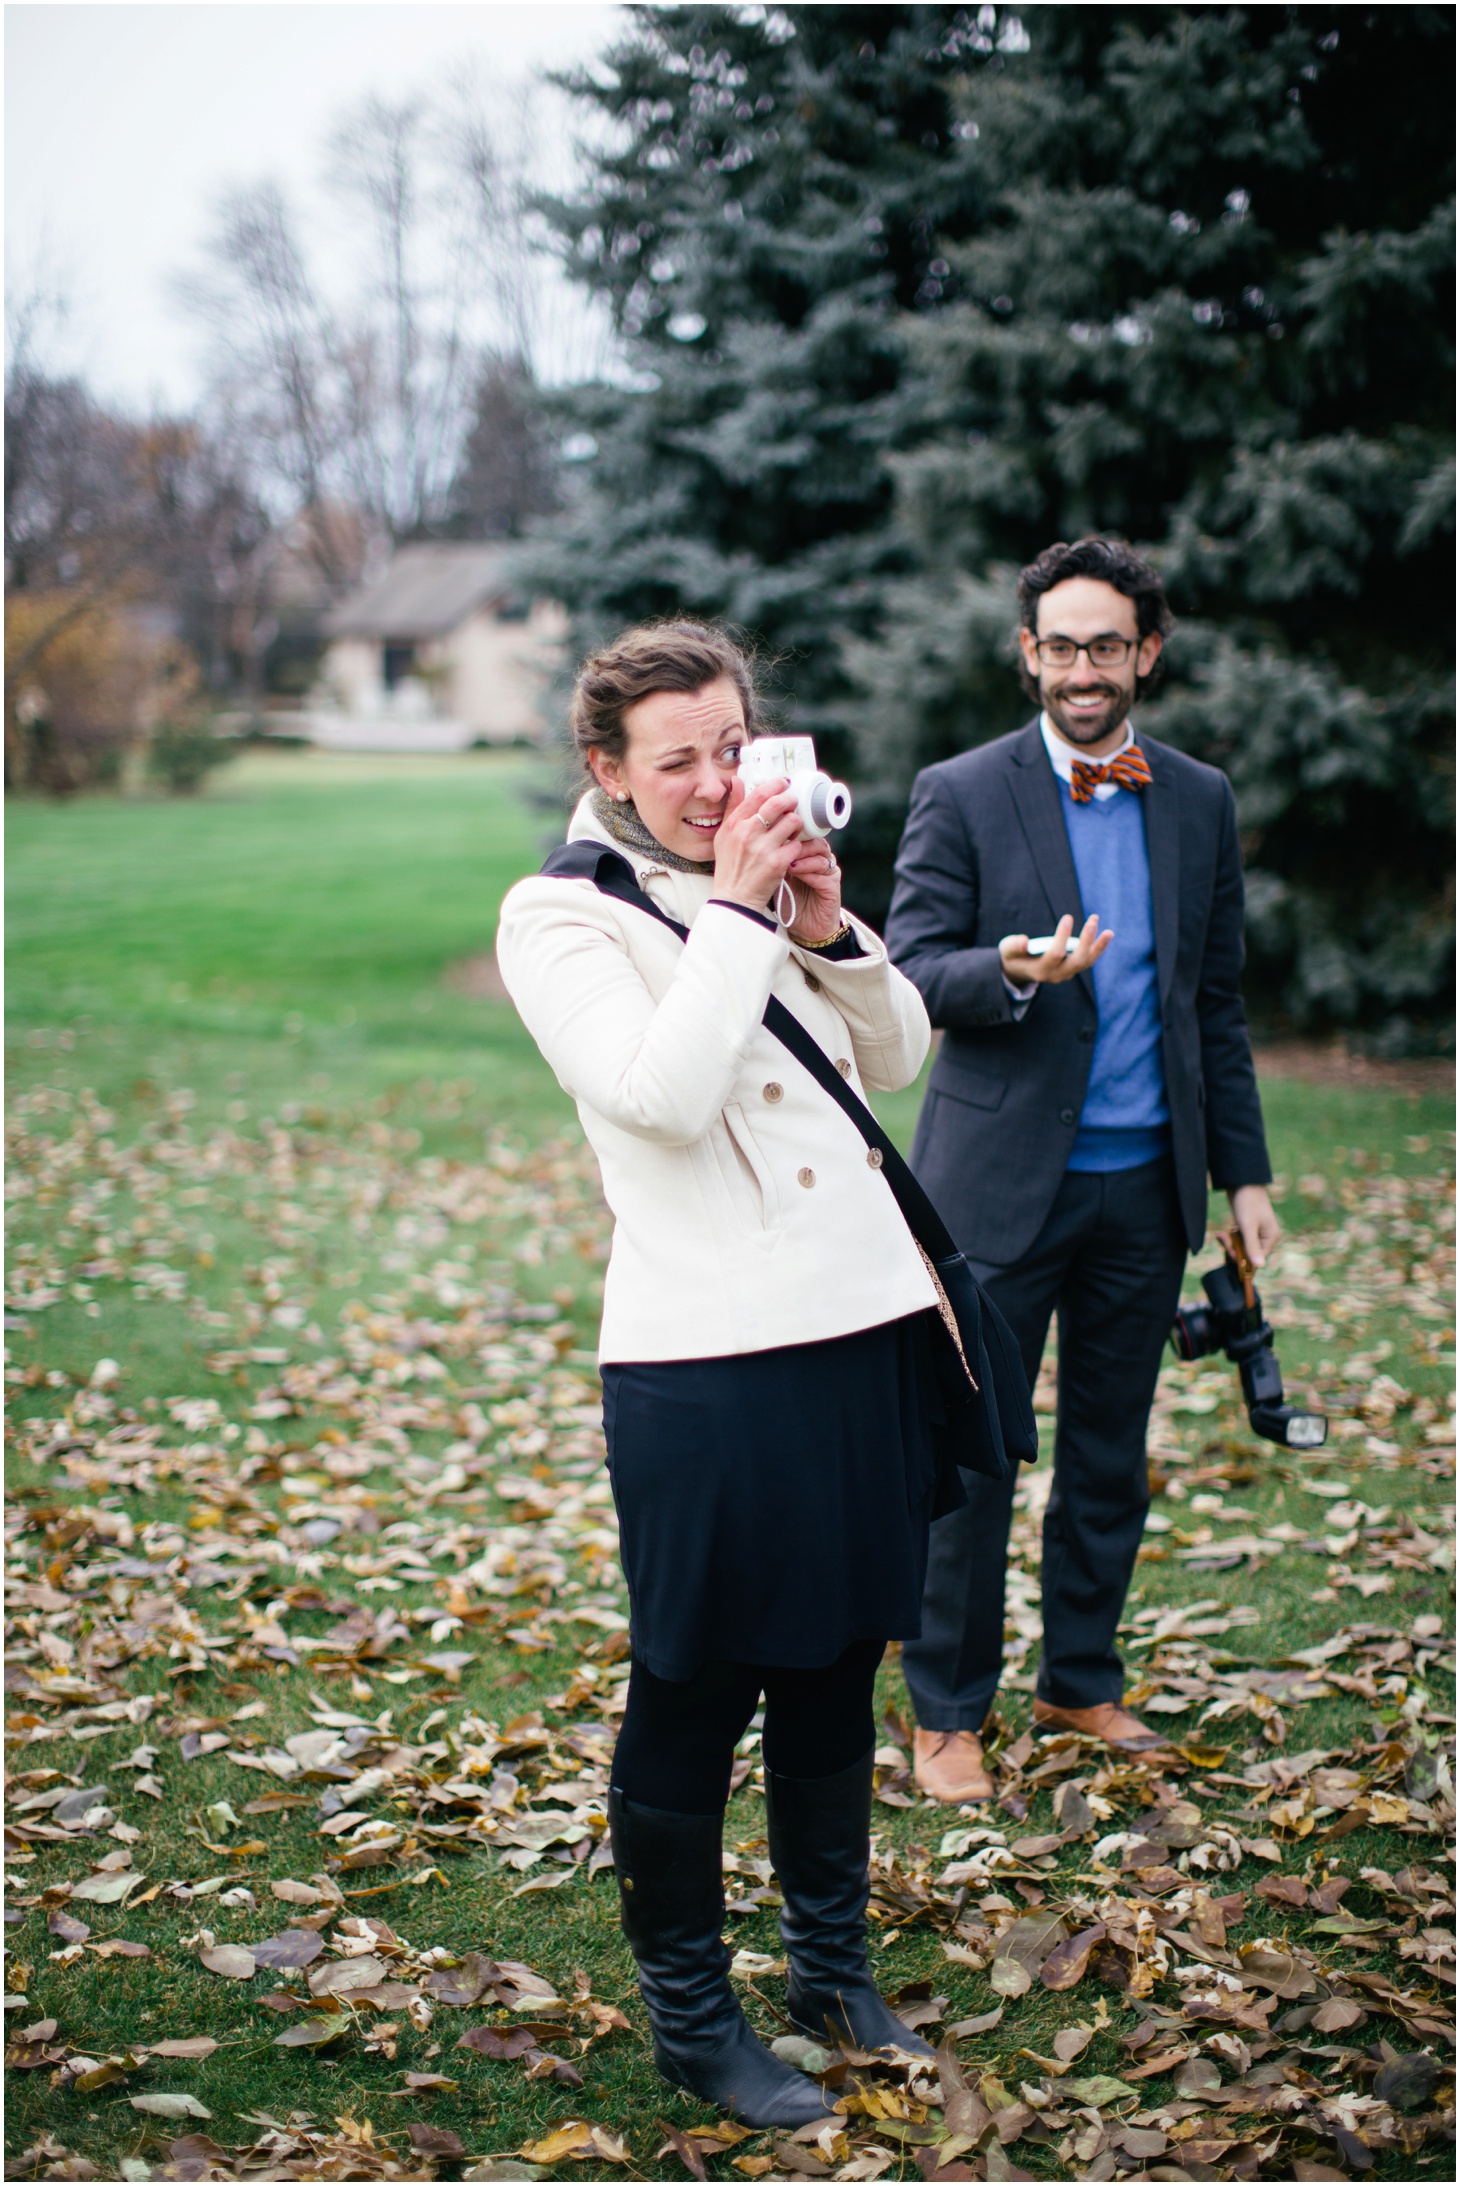 Behind the Scenes in 2014 - Weddings by Sarah Bradshaw Photography_0146